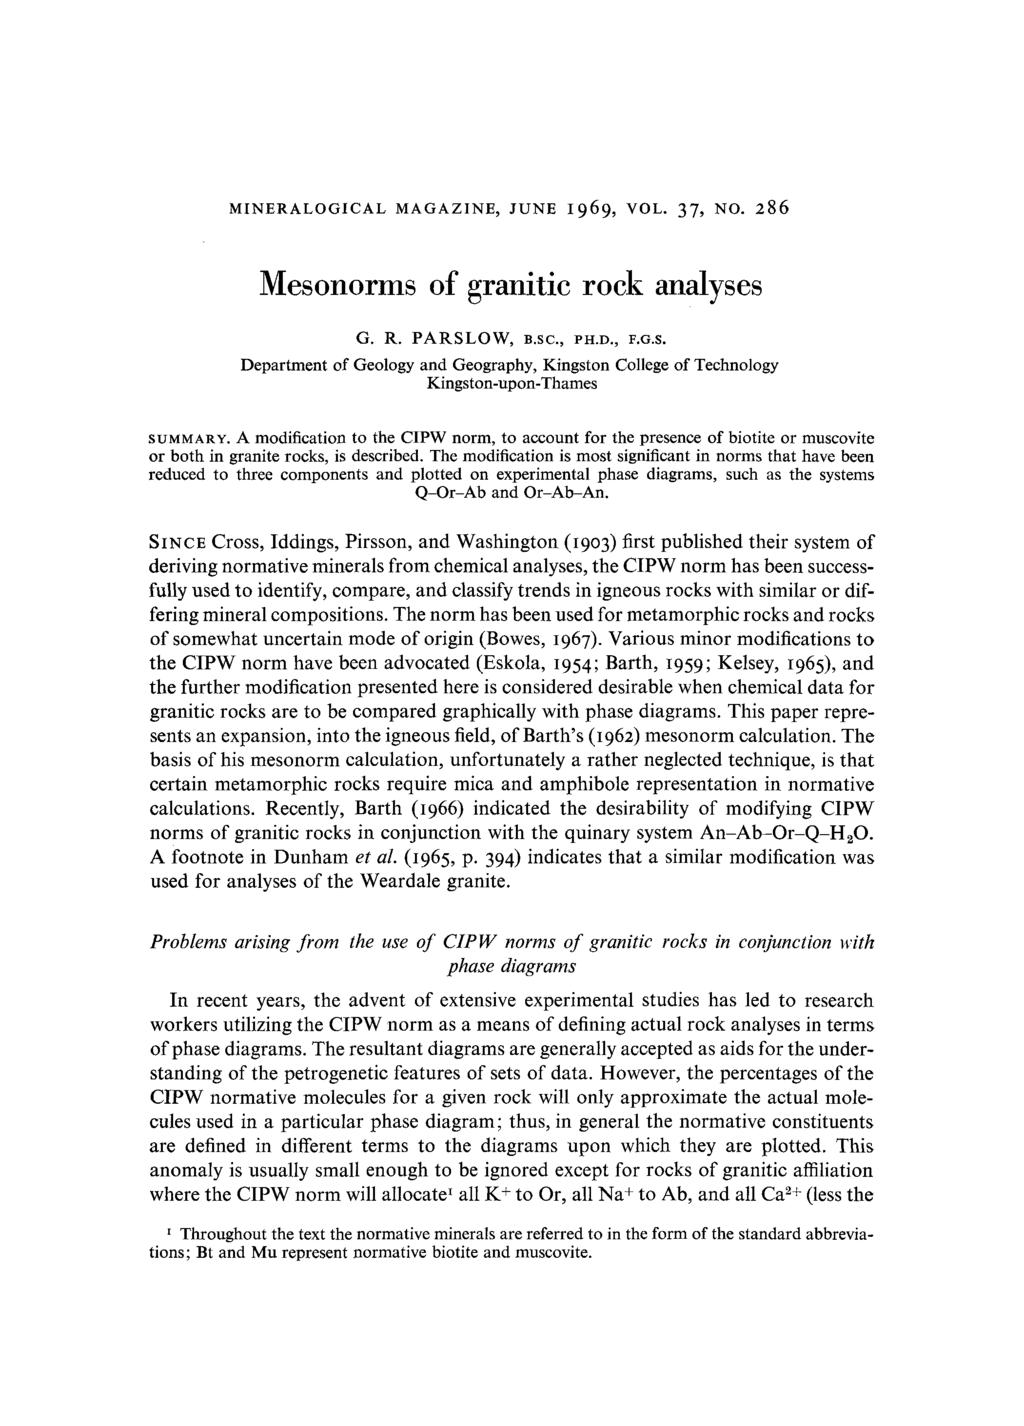 MINERALOGICAL MAGAZINE, JUNE I969, VOL. 37, NO. 286 Mesonorms of granitic rock analyses G. R. PARSLOW, Ksc., PH.D., F.G.S. Department of Geology and Geography, Kingston College of Technology Kingston-upon-Thames SUMMARY.